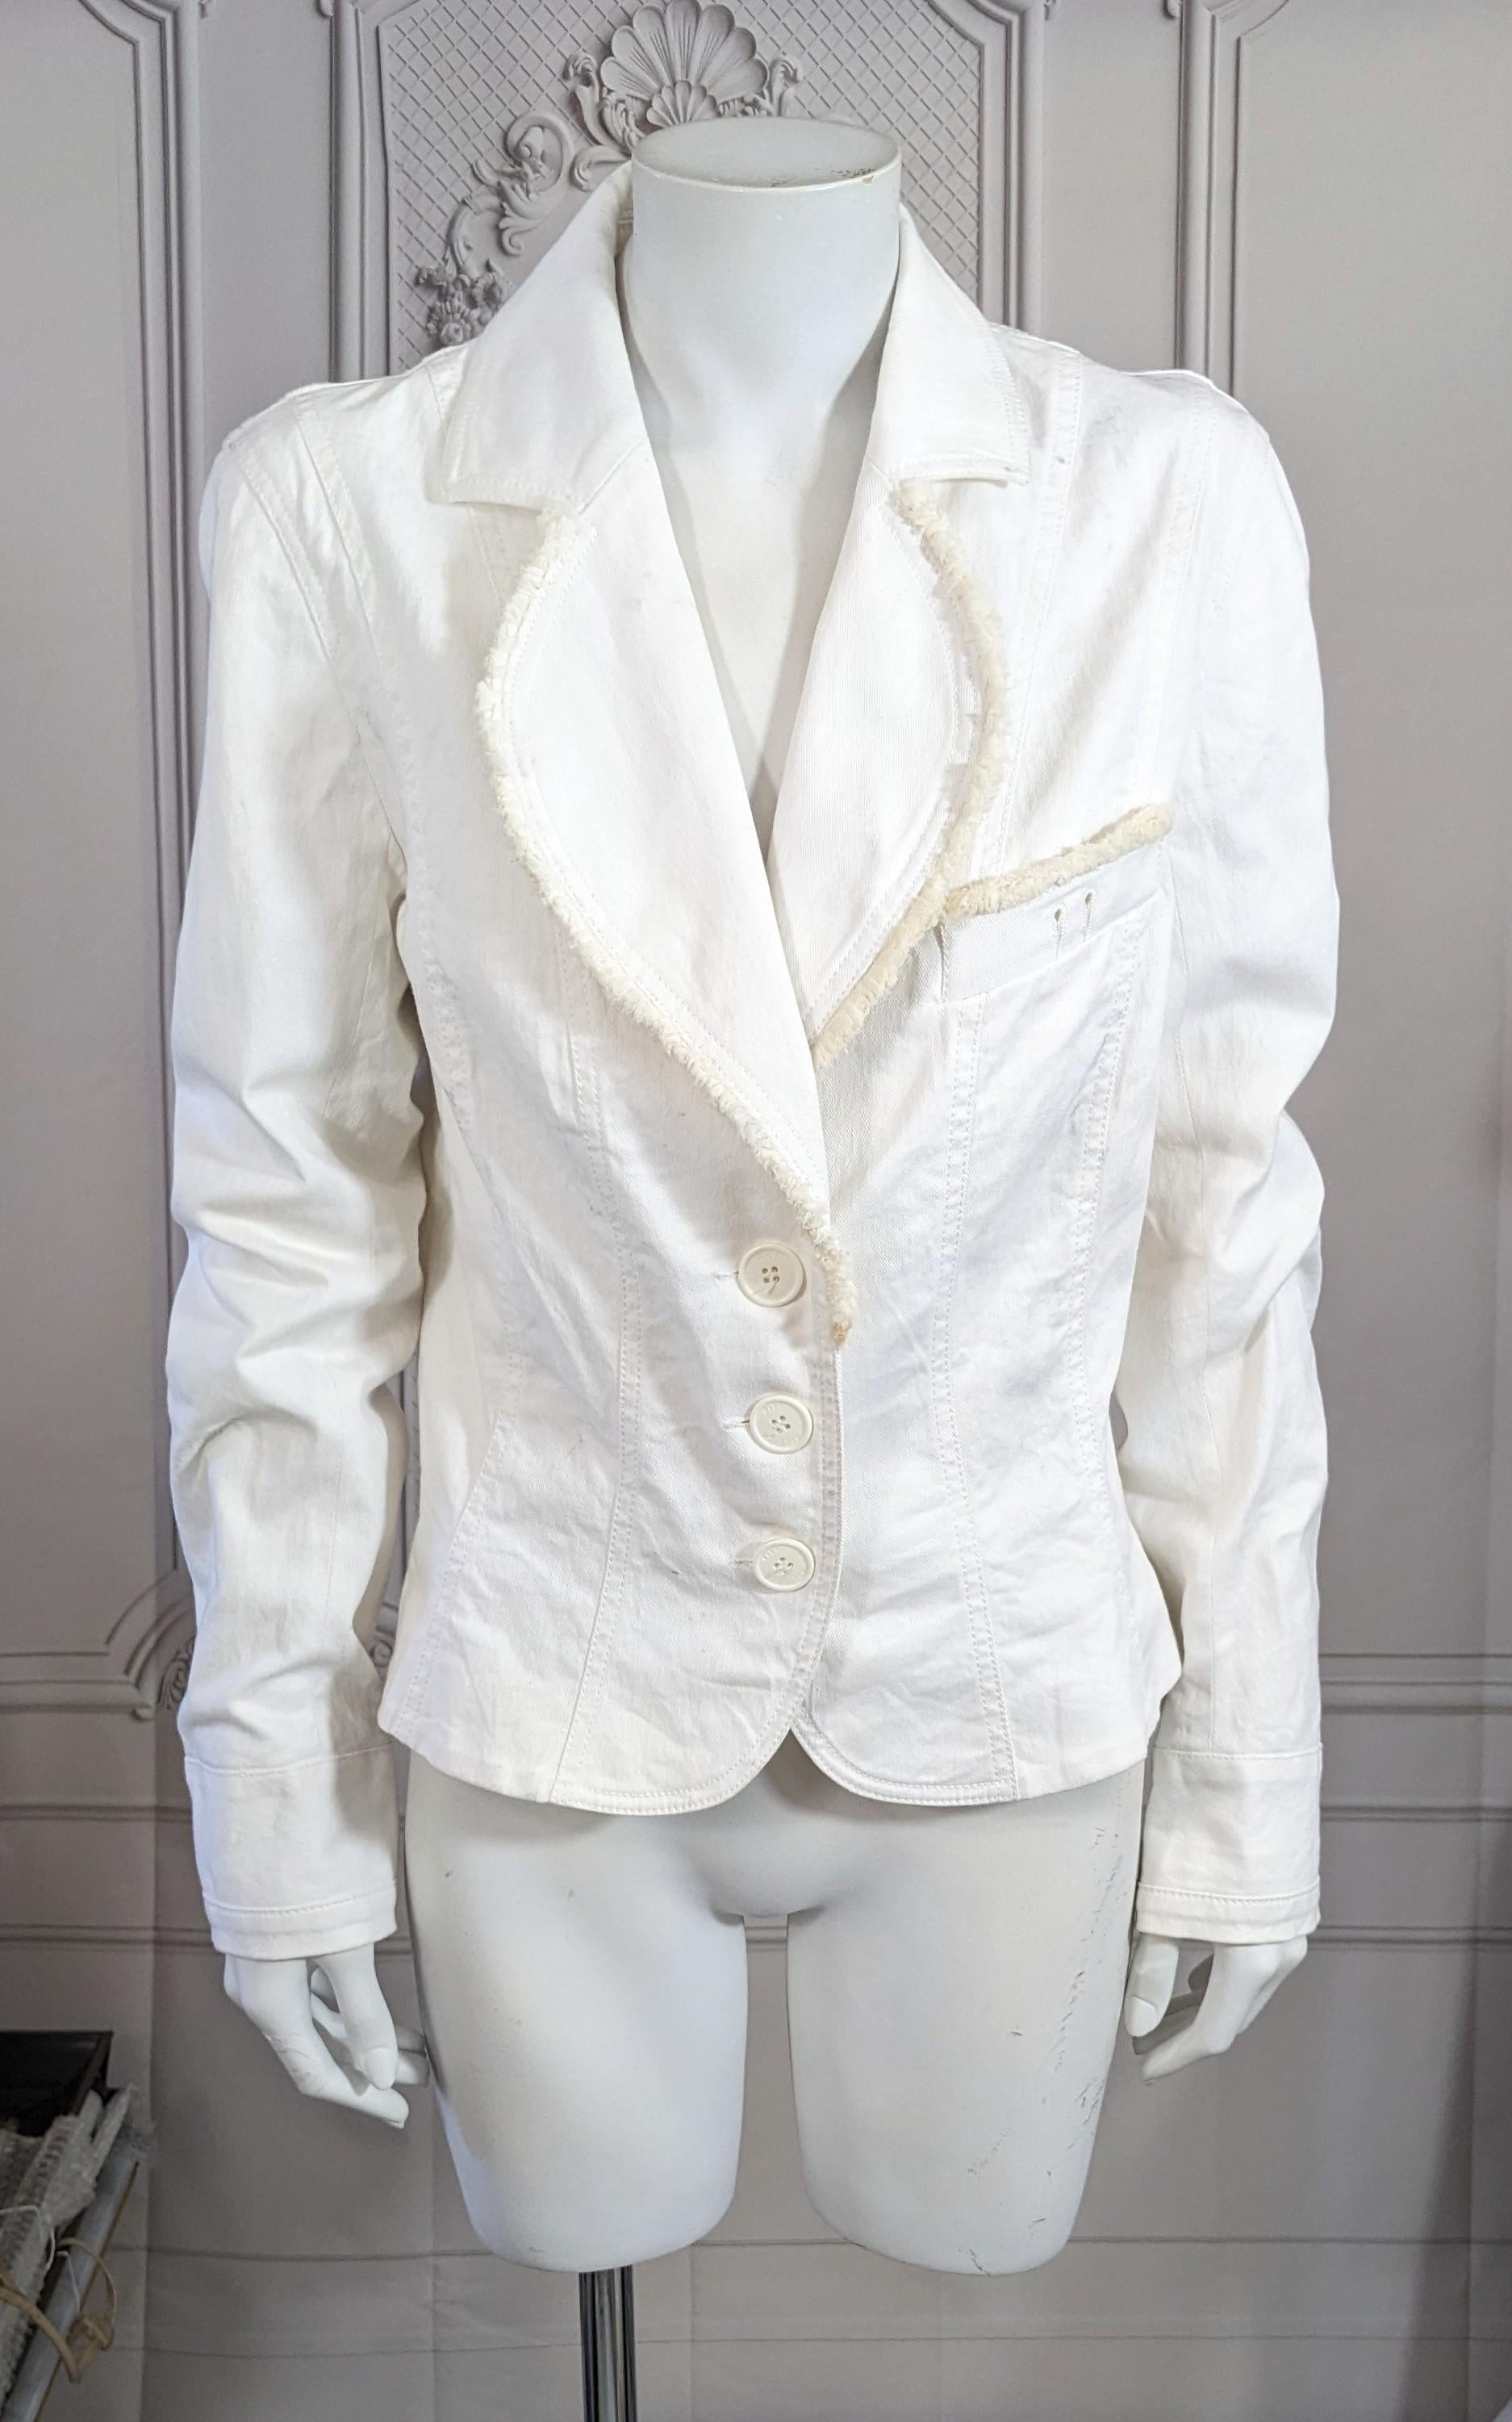 John Galliano white stretch denim blazer pre collection 2006. Fitted single breasted with self off white denim fringe. Size 8, stretch silk lining.
Good Condition, minor marks, Rubber Label.